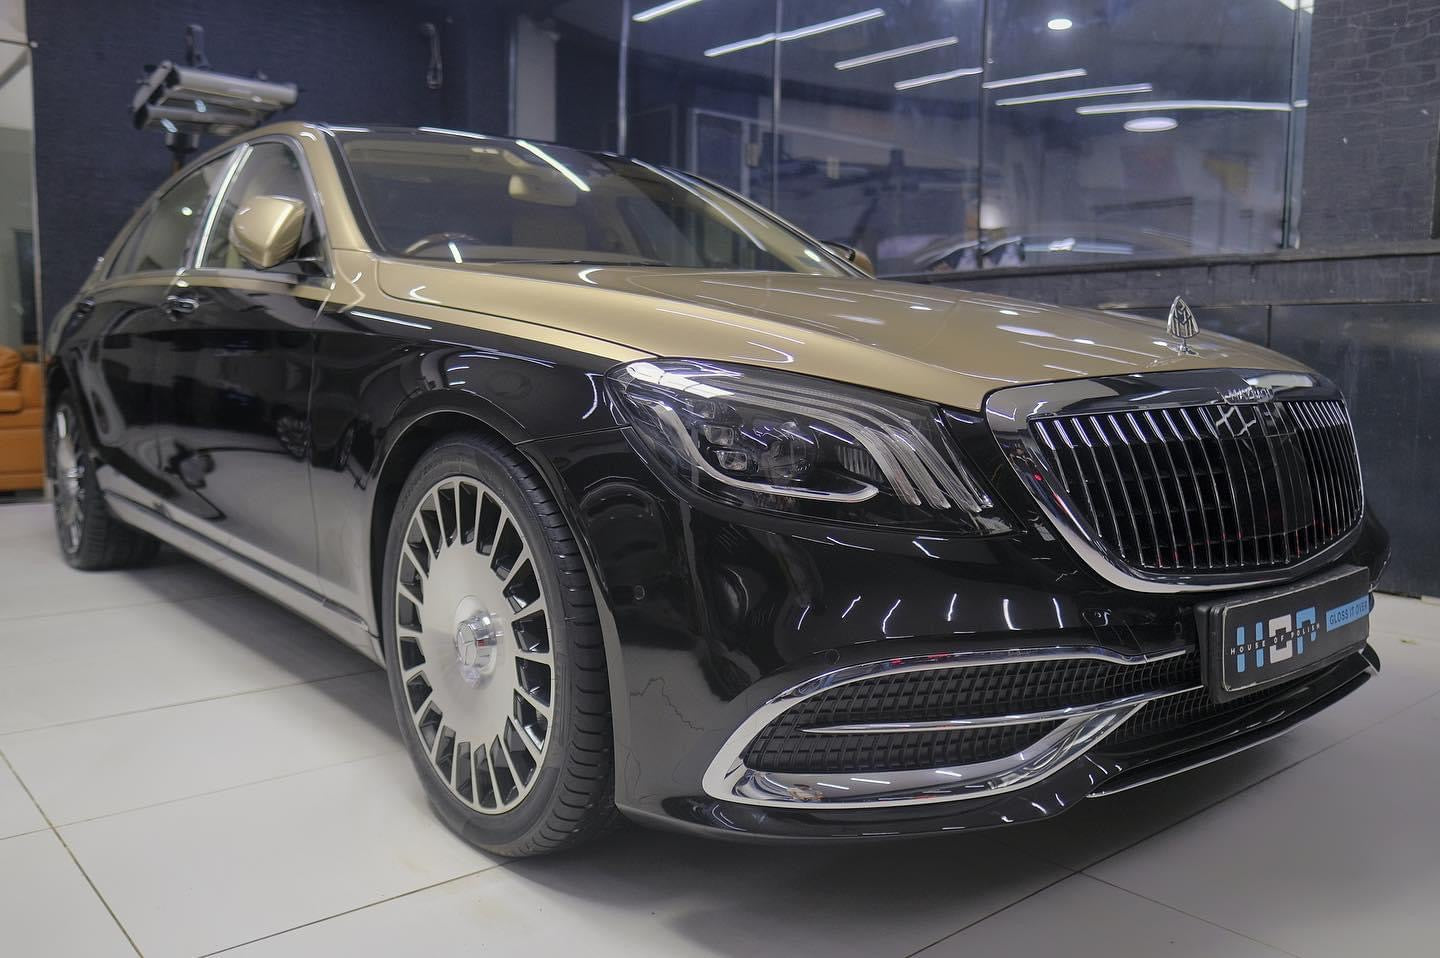 MAYBACH Style Bodykit Upgrade Facelift For 2014-2020 Mercedes Benz S-Class W222